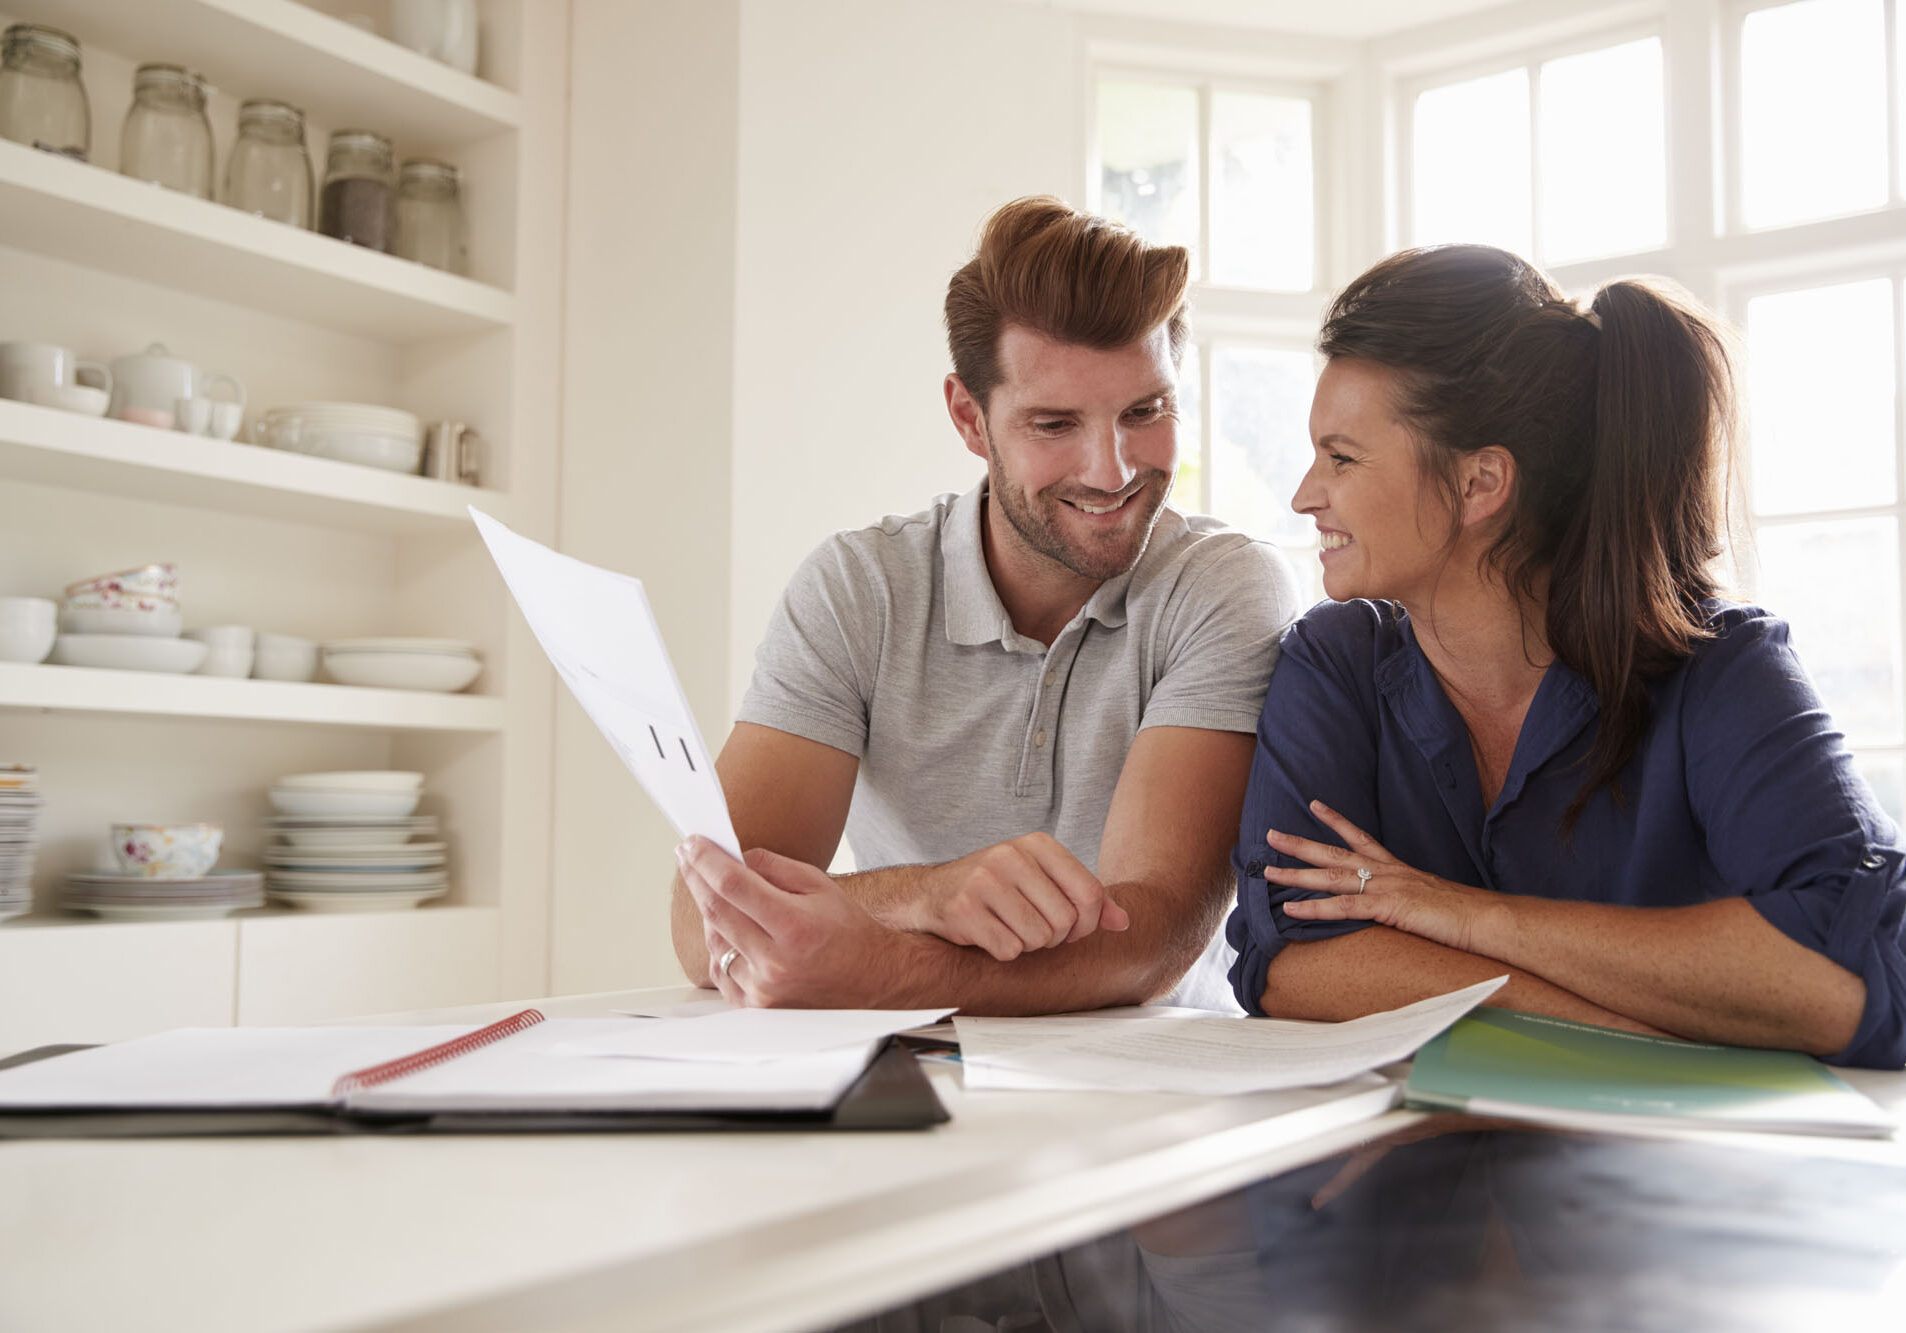 Couple Looking At Domestic Finances At Home Together